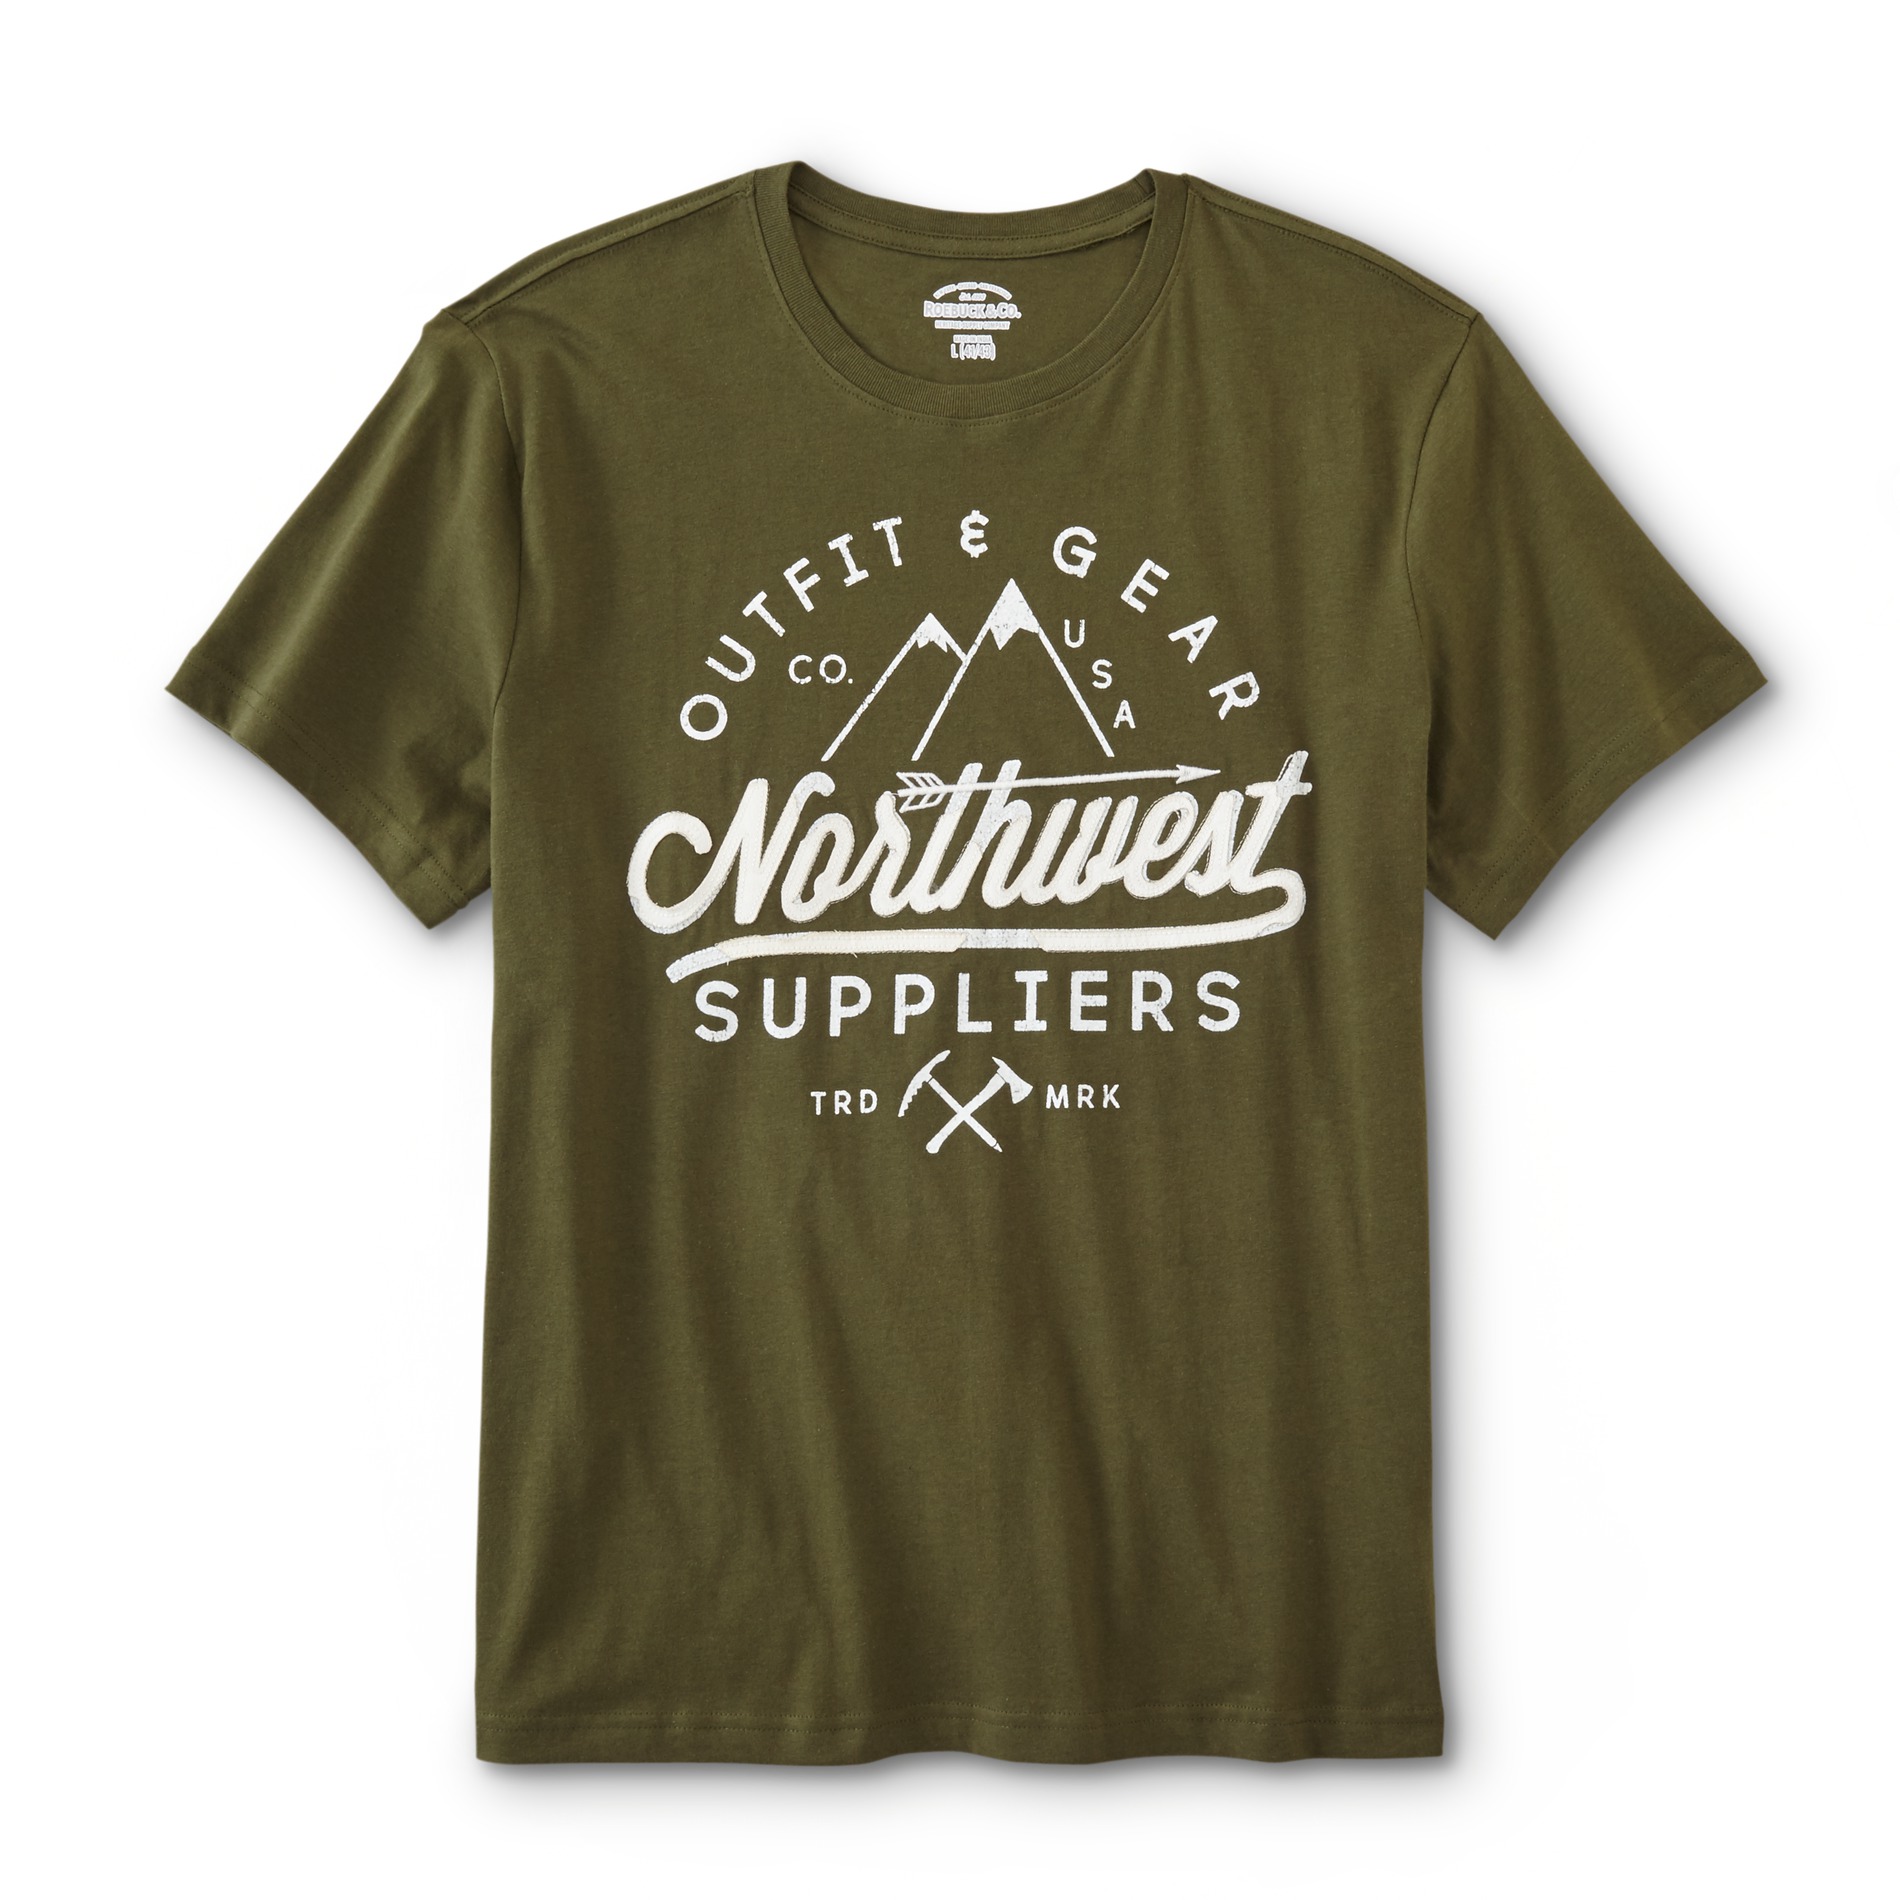 Roebuck & Co. Young Men's Graphic T-Shirt - Northwest Suppliers